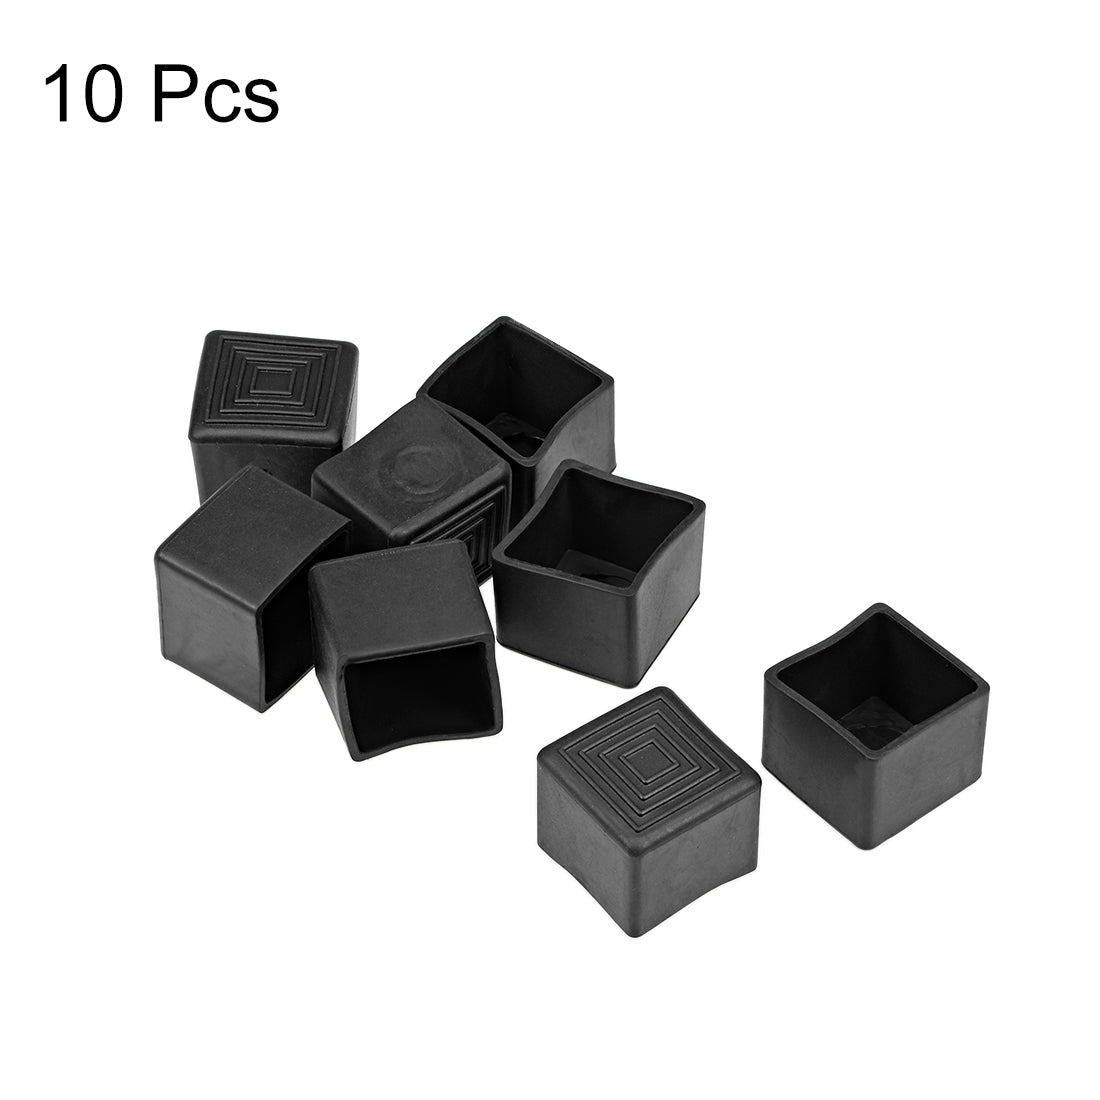 uxcell Uxcell Rubber End Caps Covers 28mm x 28mm Square Furniture Table Chair Legs 10Pcs